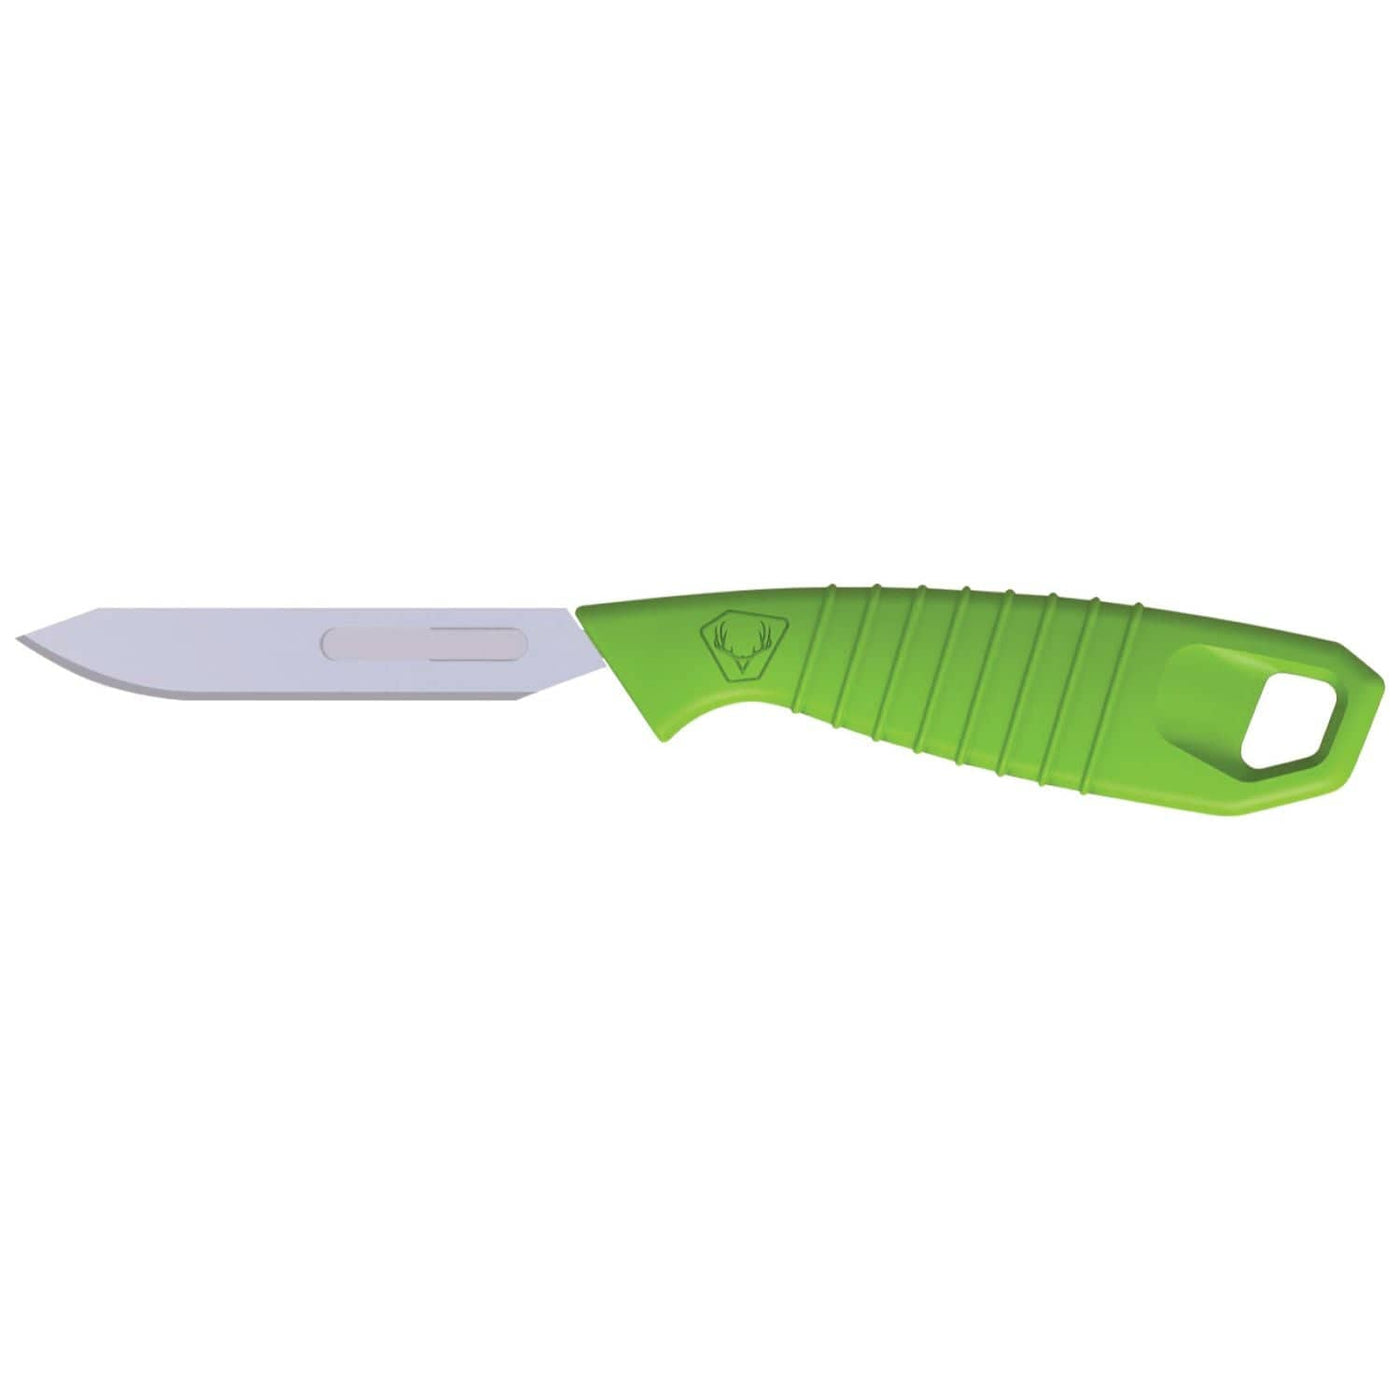 HME HME Knife with Replaceable Blade Green Hunting